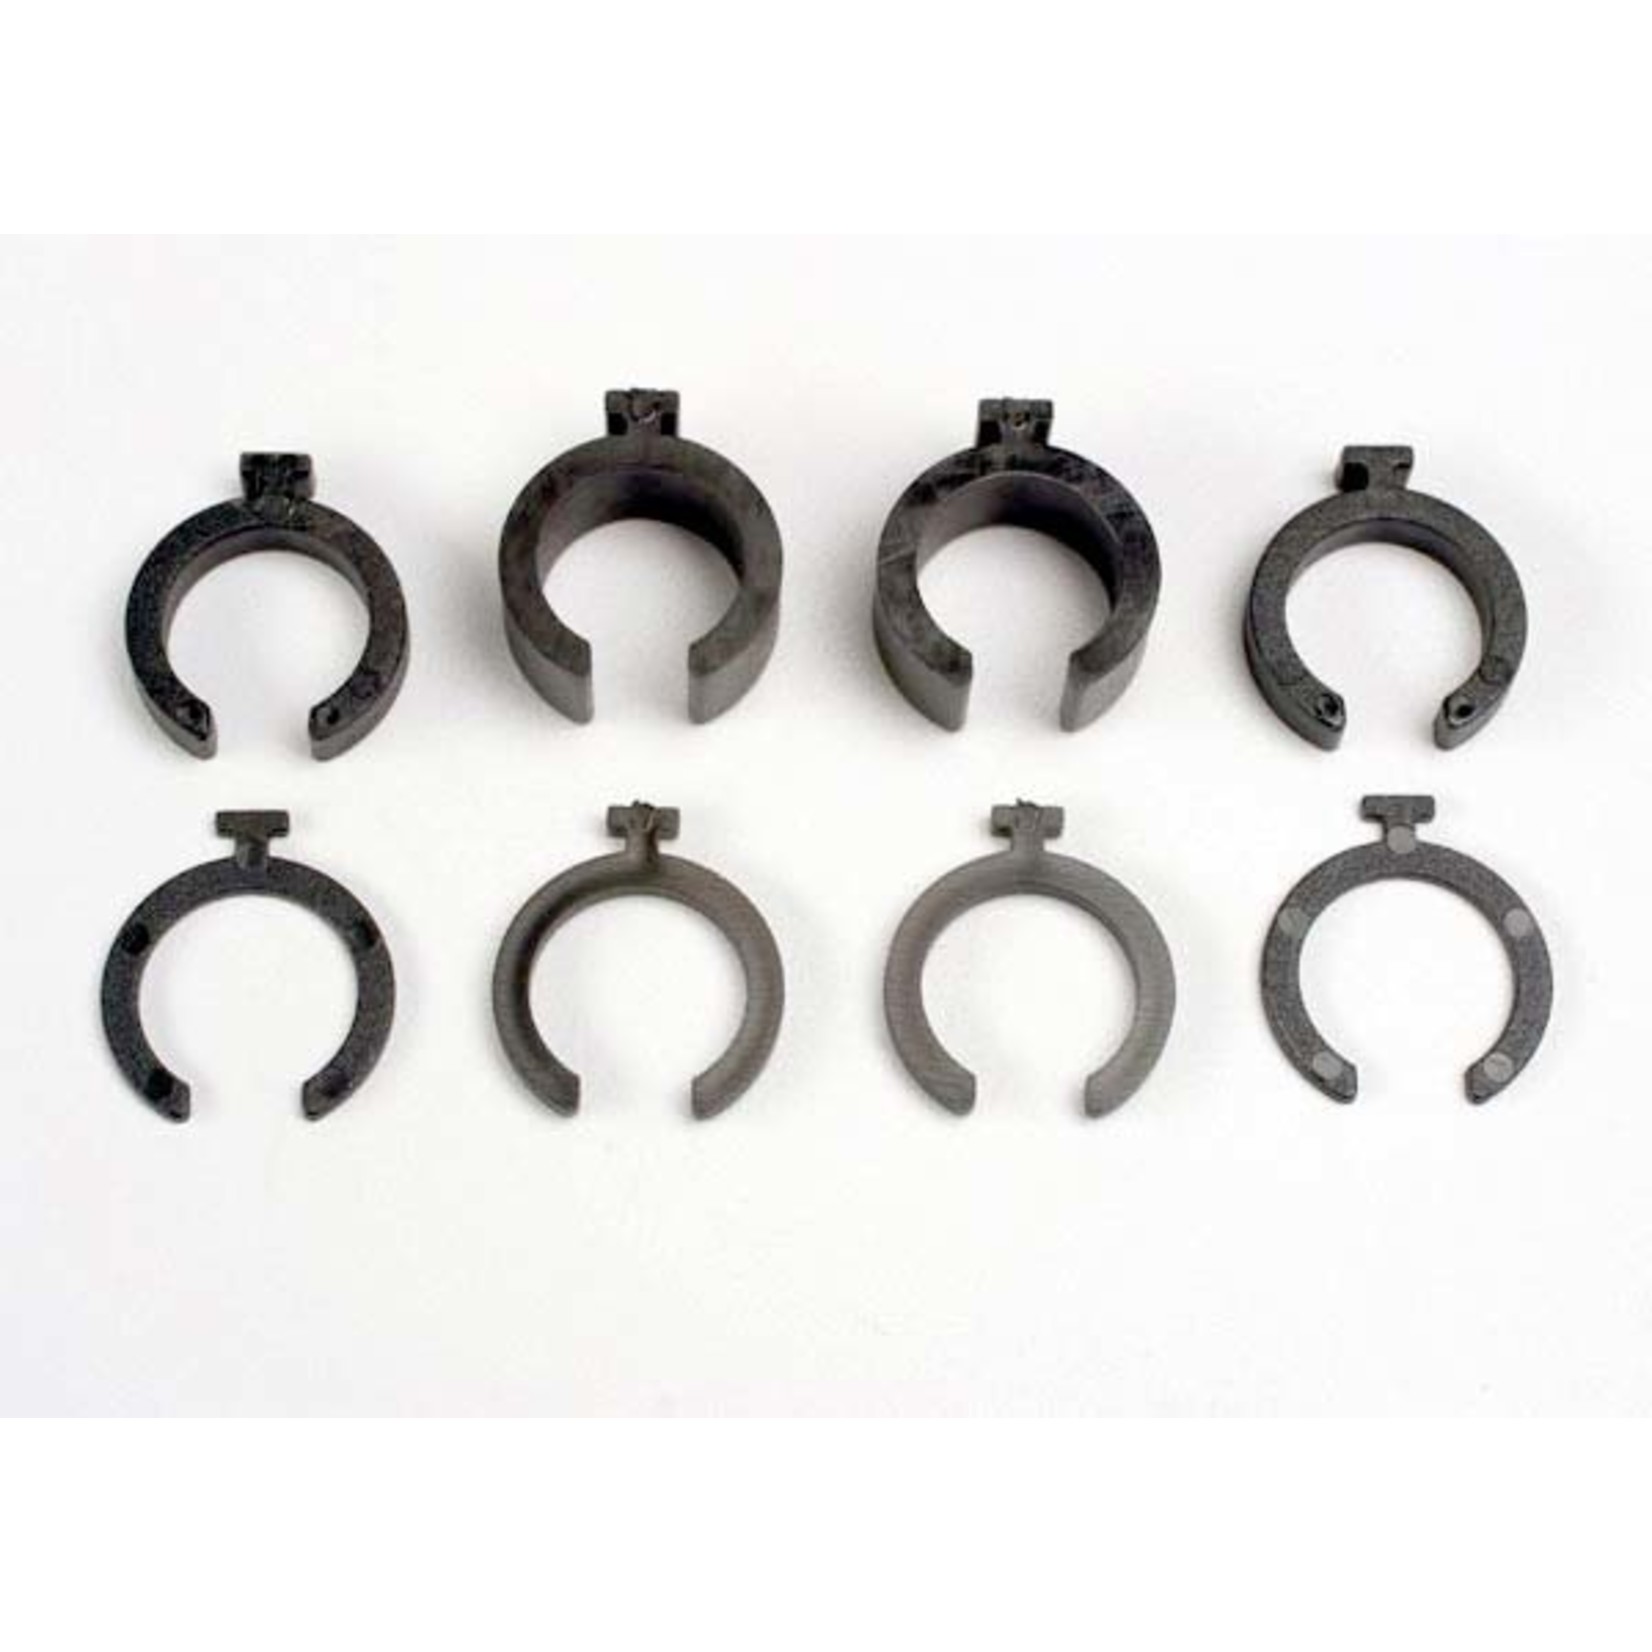 Traxxas 3769 - Spring pre-load spacers: 1mm (4)/ 2mm (2)/